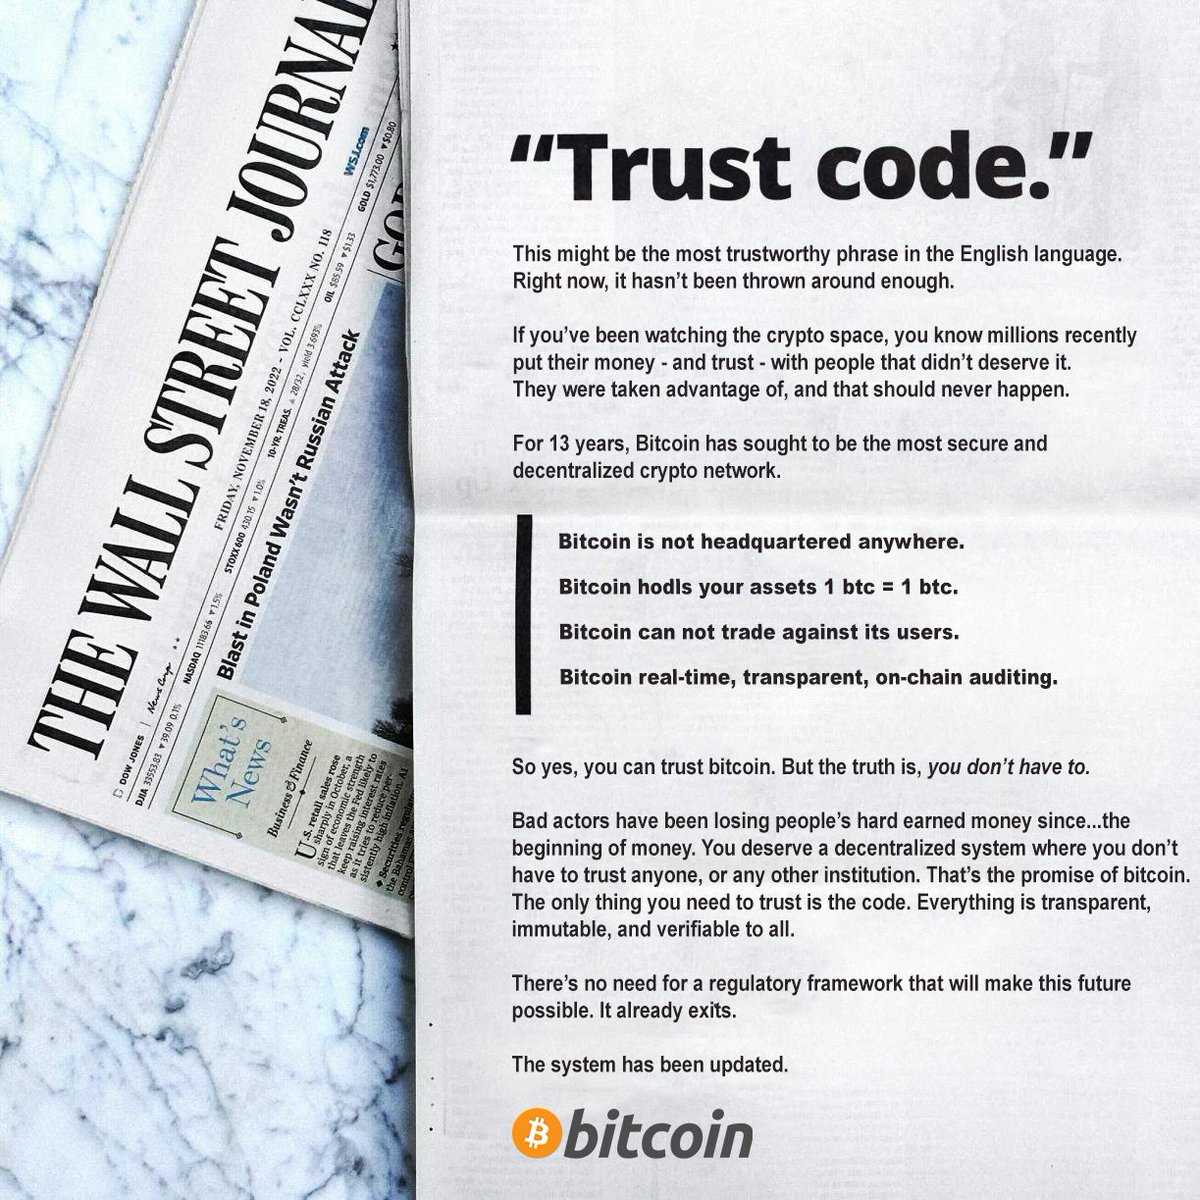 Bitcoin, the system has been updated, parody ad, Nov 2022